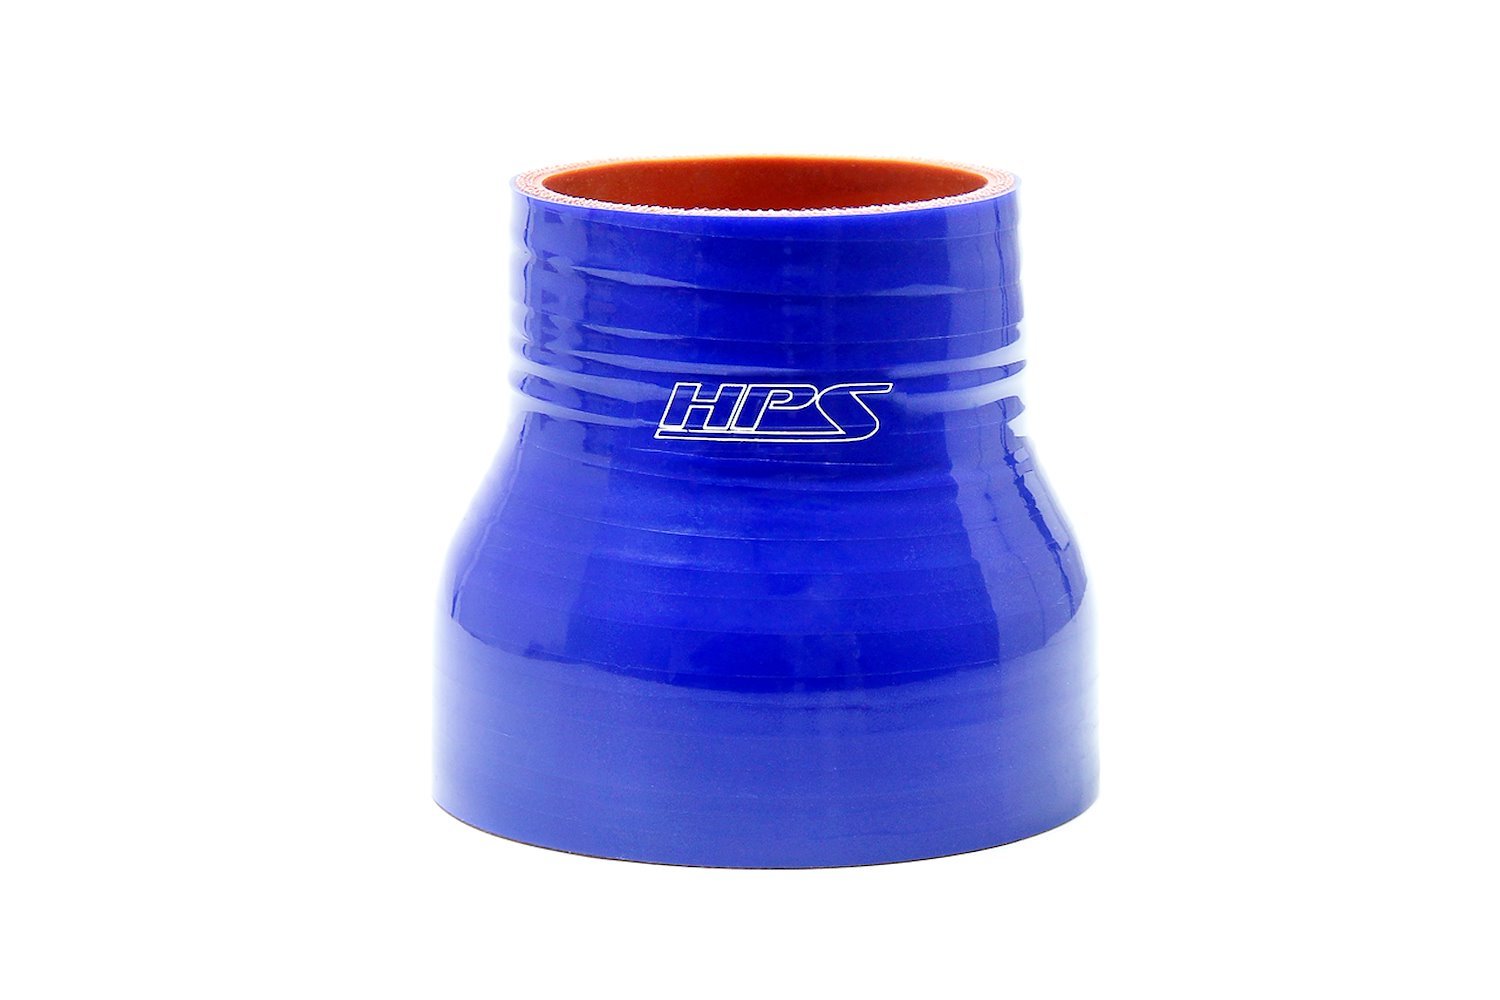 HTSR-187-200-BLUE Silicone Reducer Hose, High-Temp 4-Ply Reinforced, 1-7/8 in. - 2 in. ID, 3 in. Long, Blue